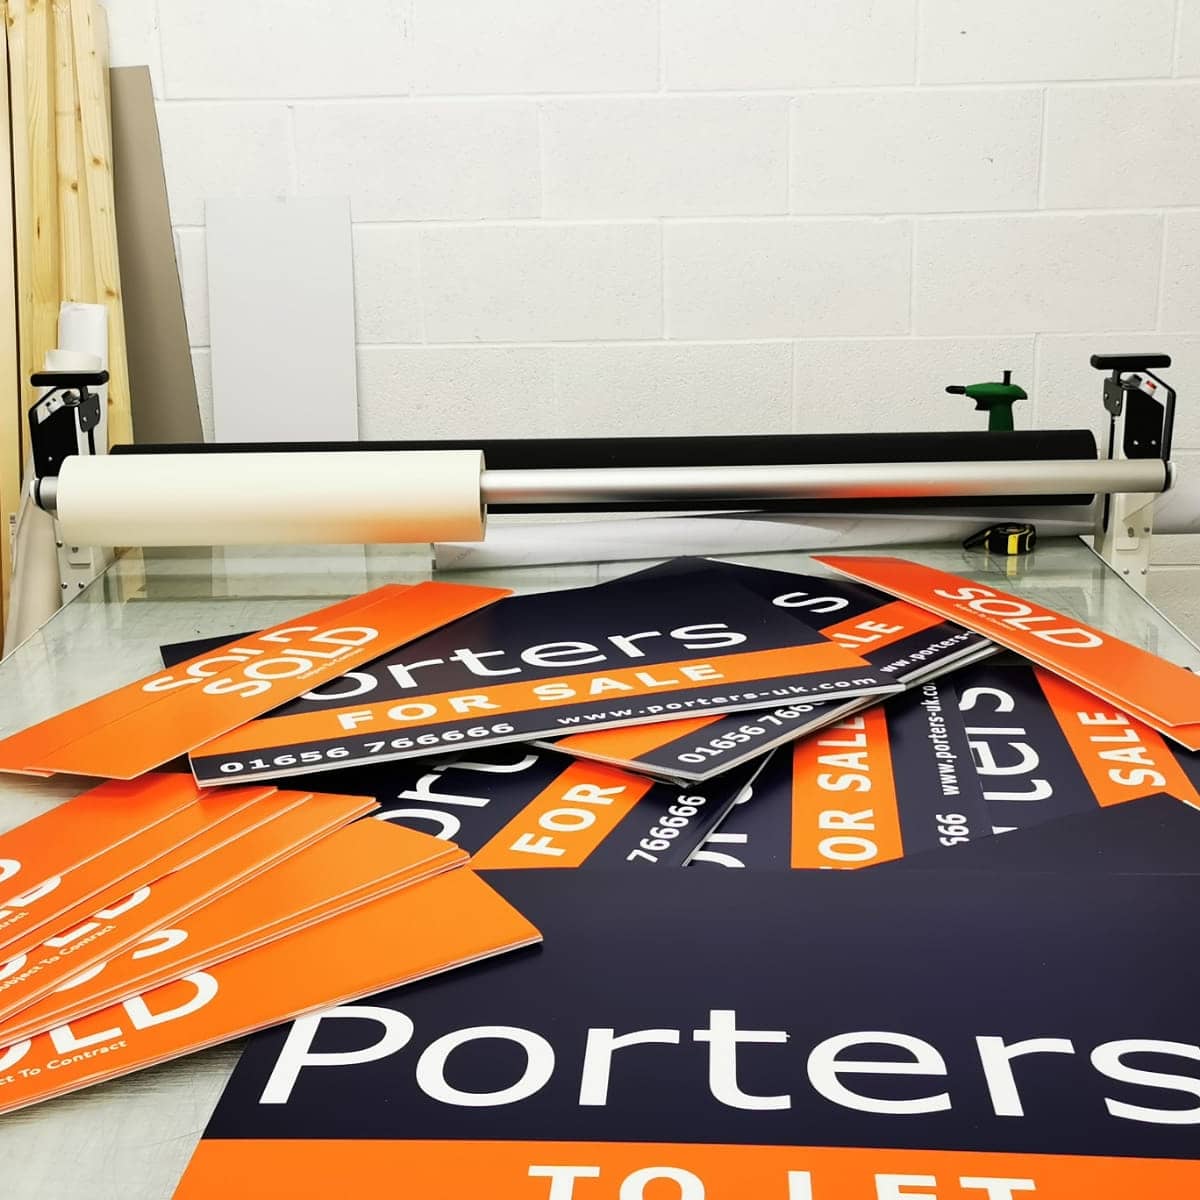 Production completed on lots and lots of #estateagent #correx #tboards for @PorterBridgend.

#signage / #signs